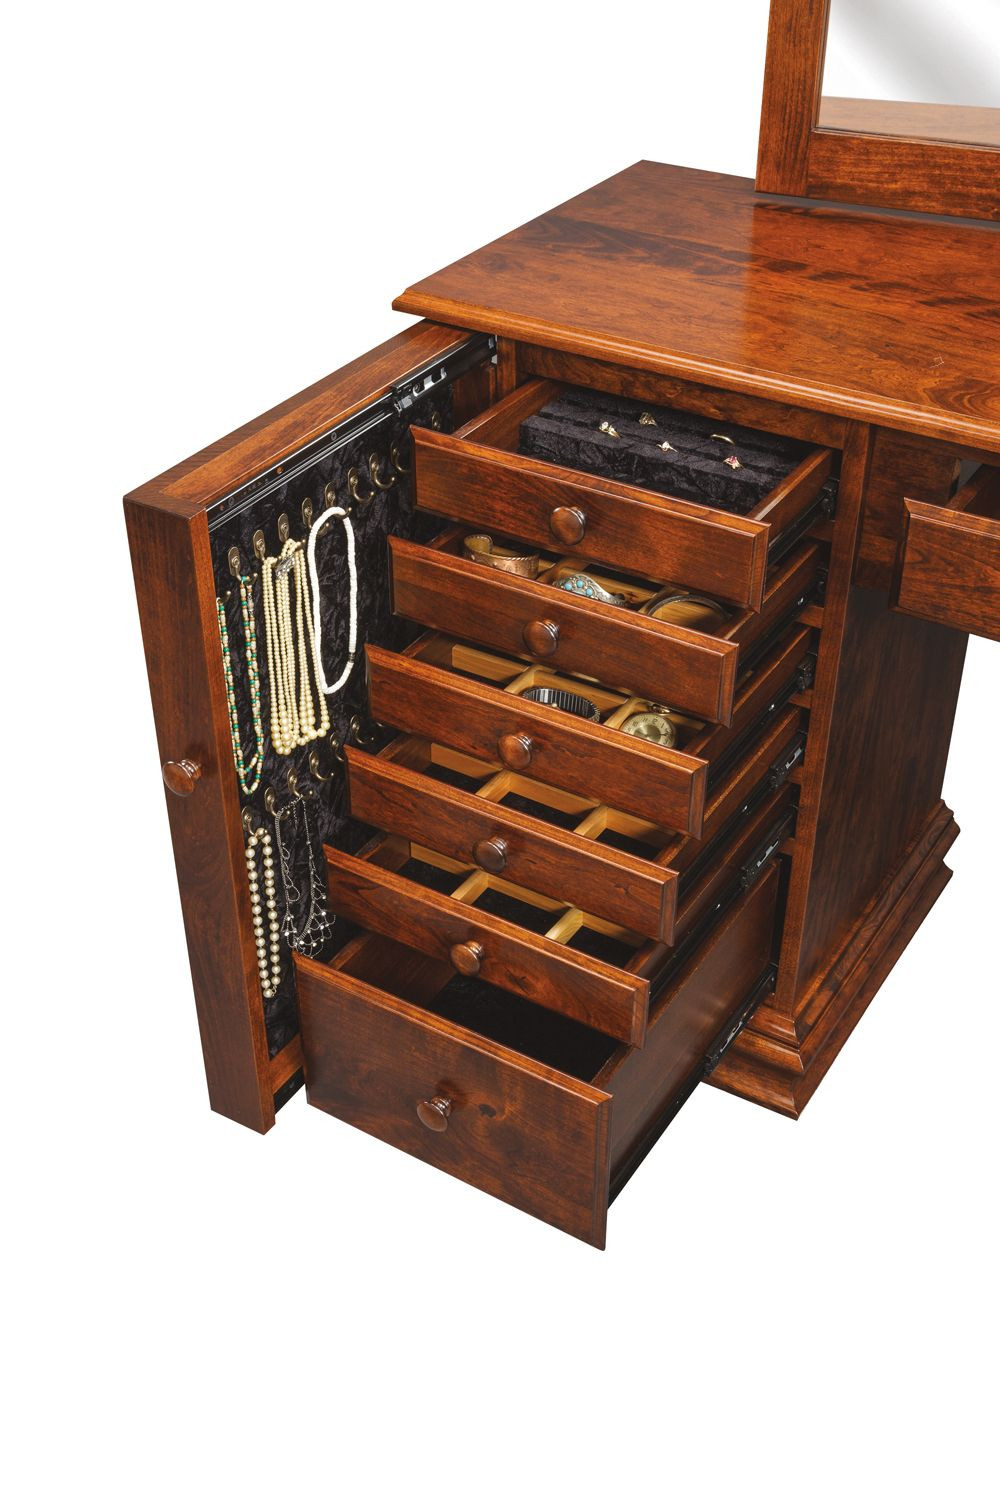 solid-wood-clock-base-jewelry-armoire